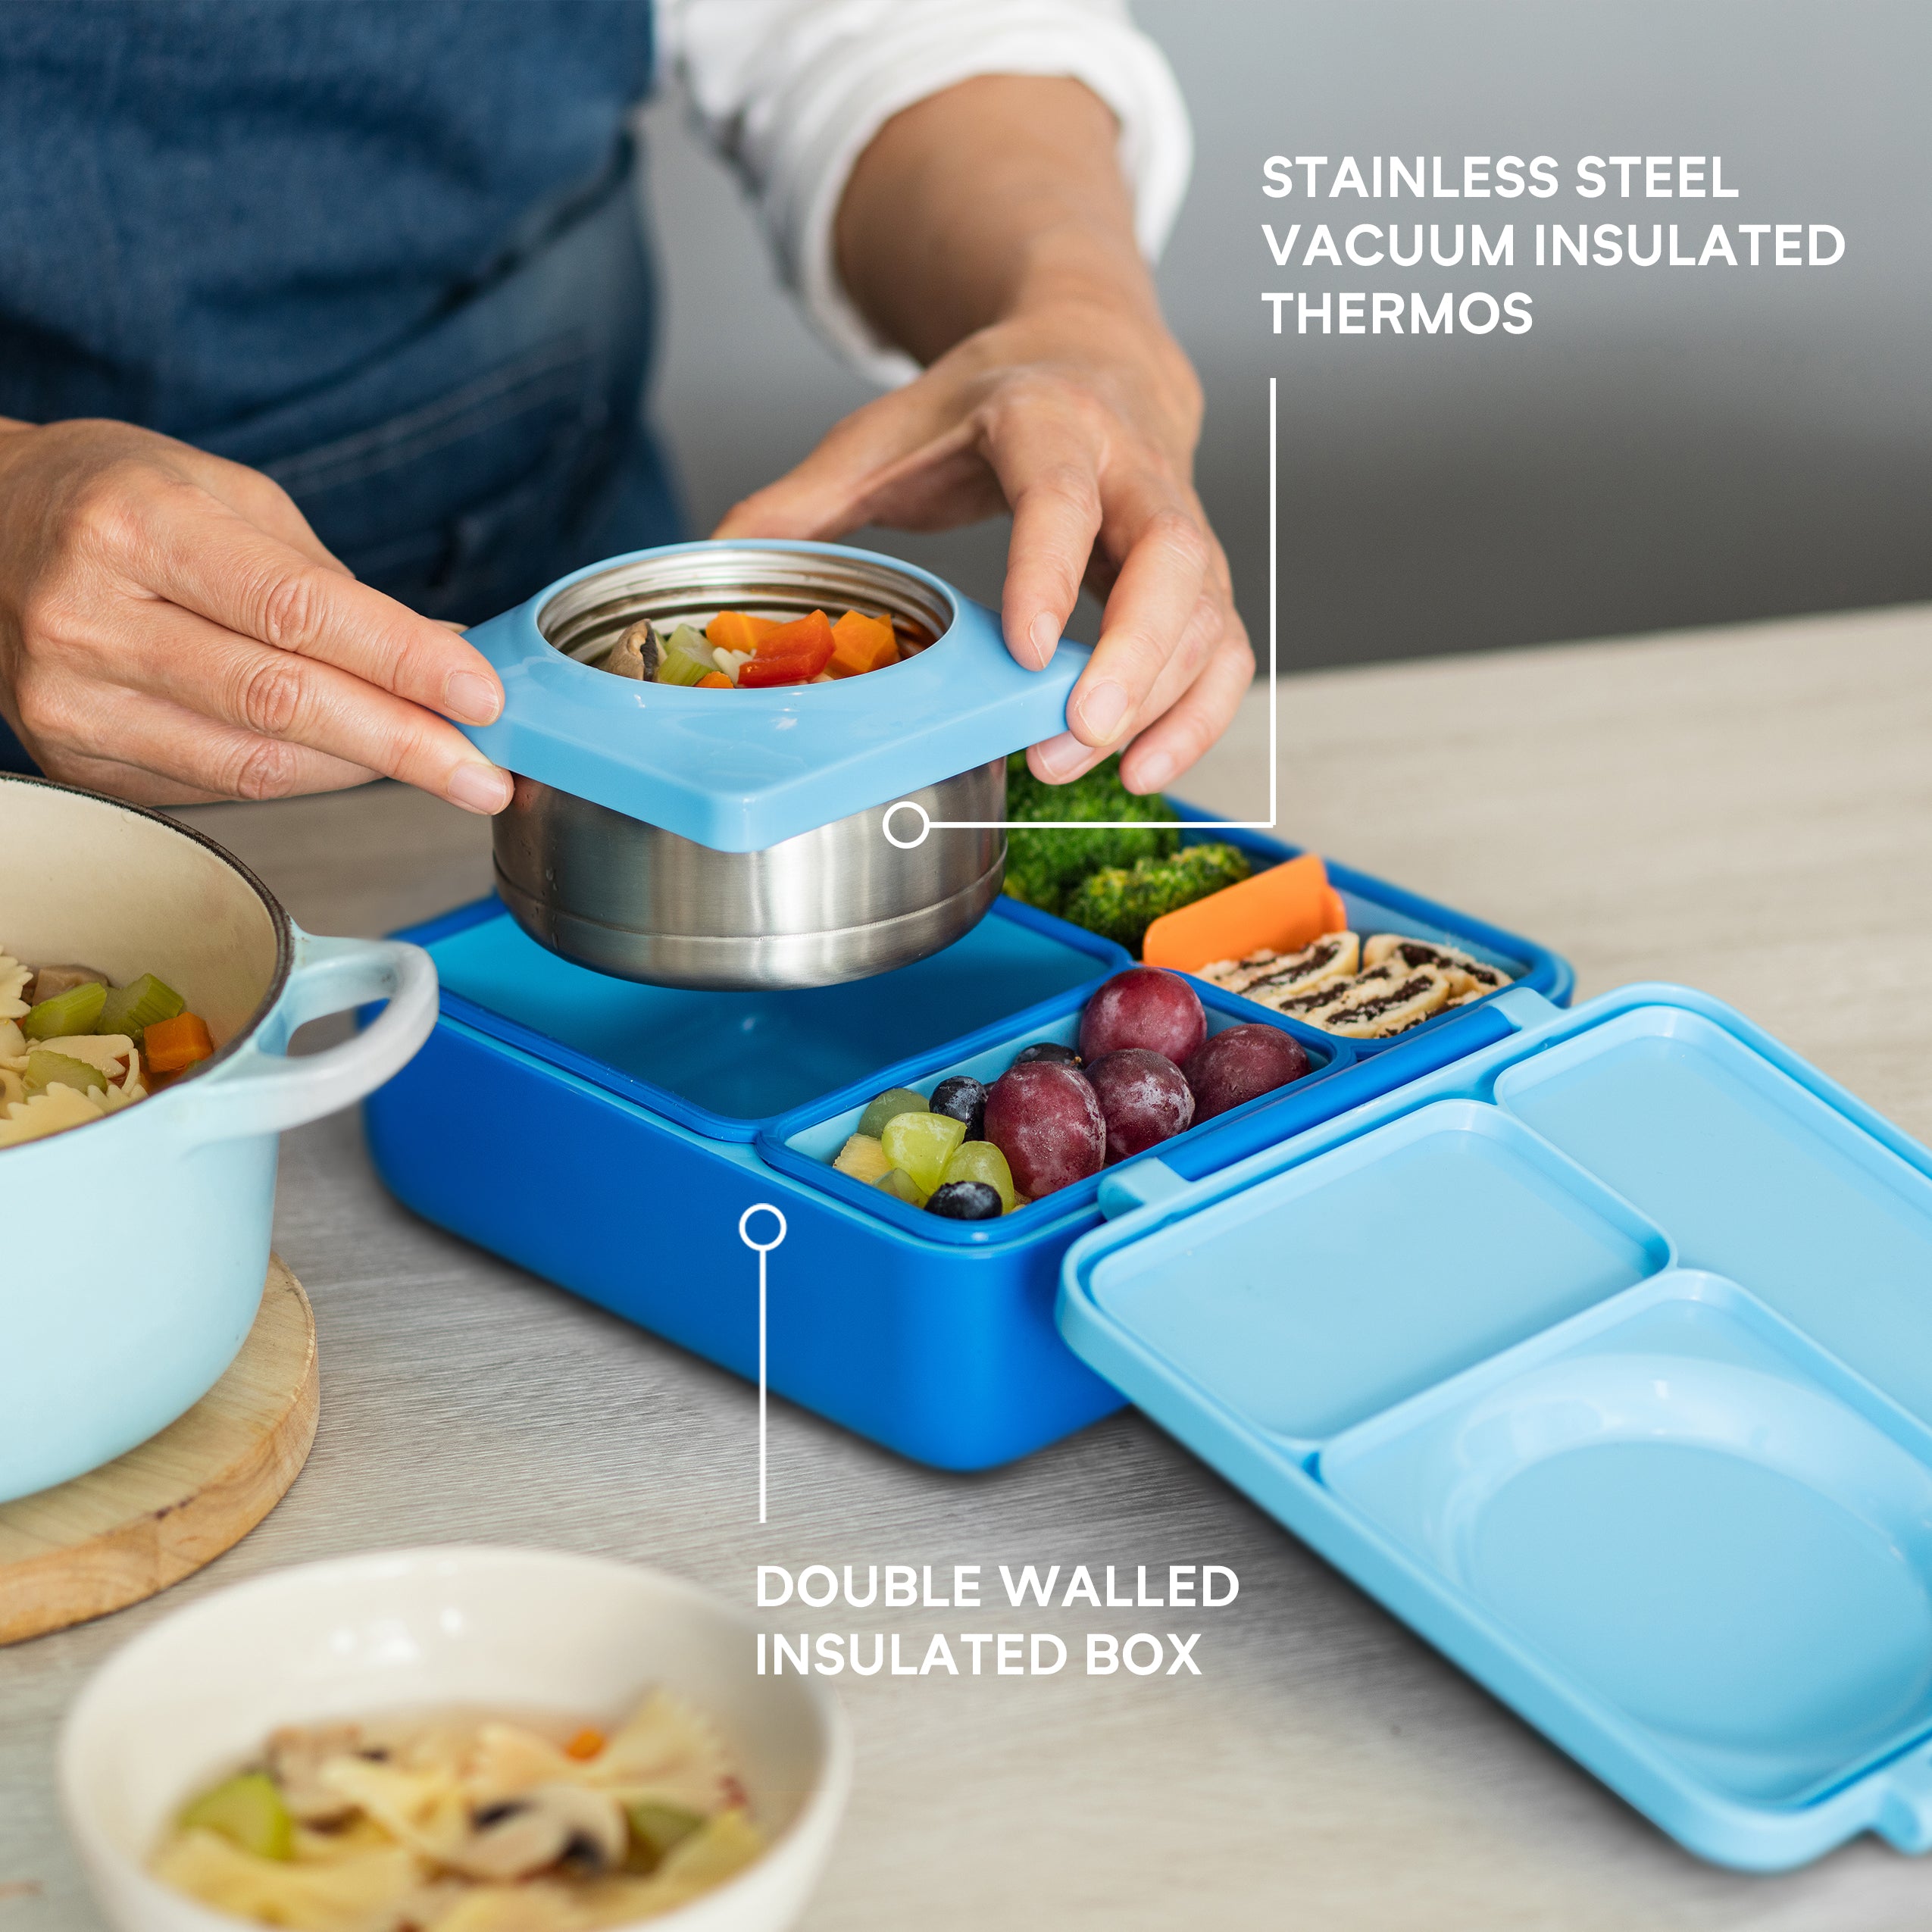 Get Endless Lunch Possibilities With The OmieBox